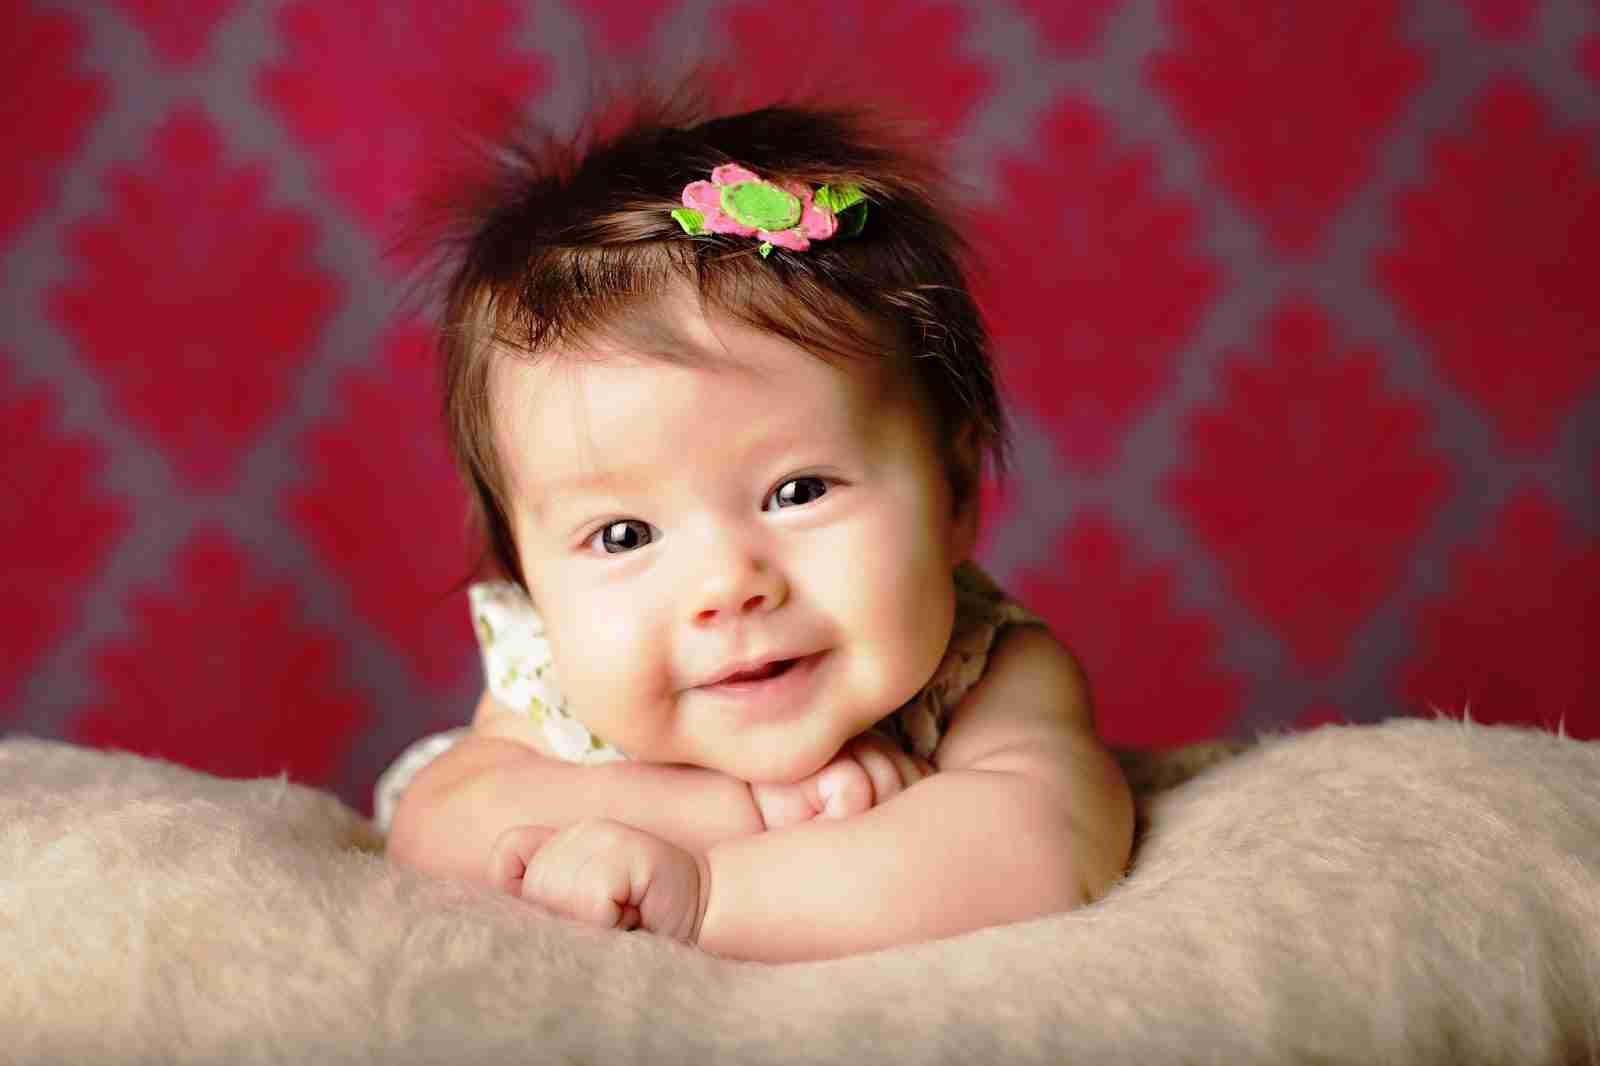 Indian Cute Baby HD Wallpaper Free Download